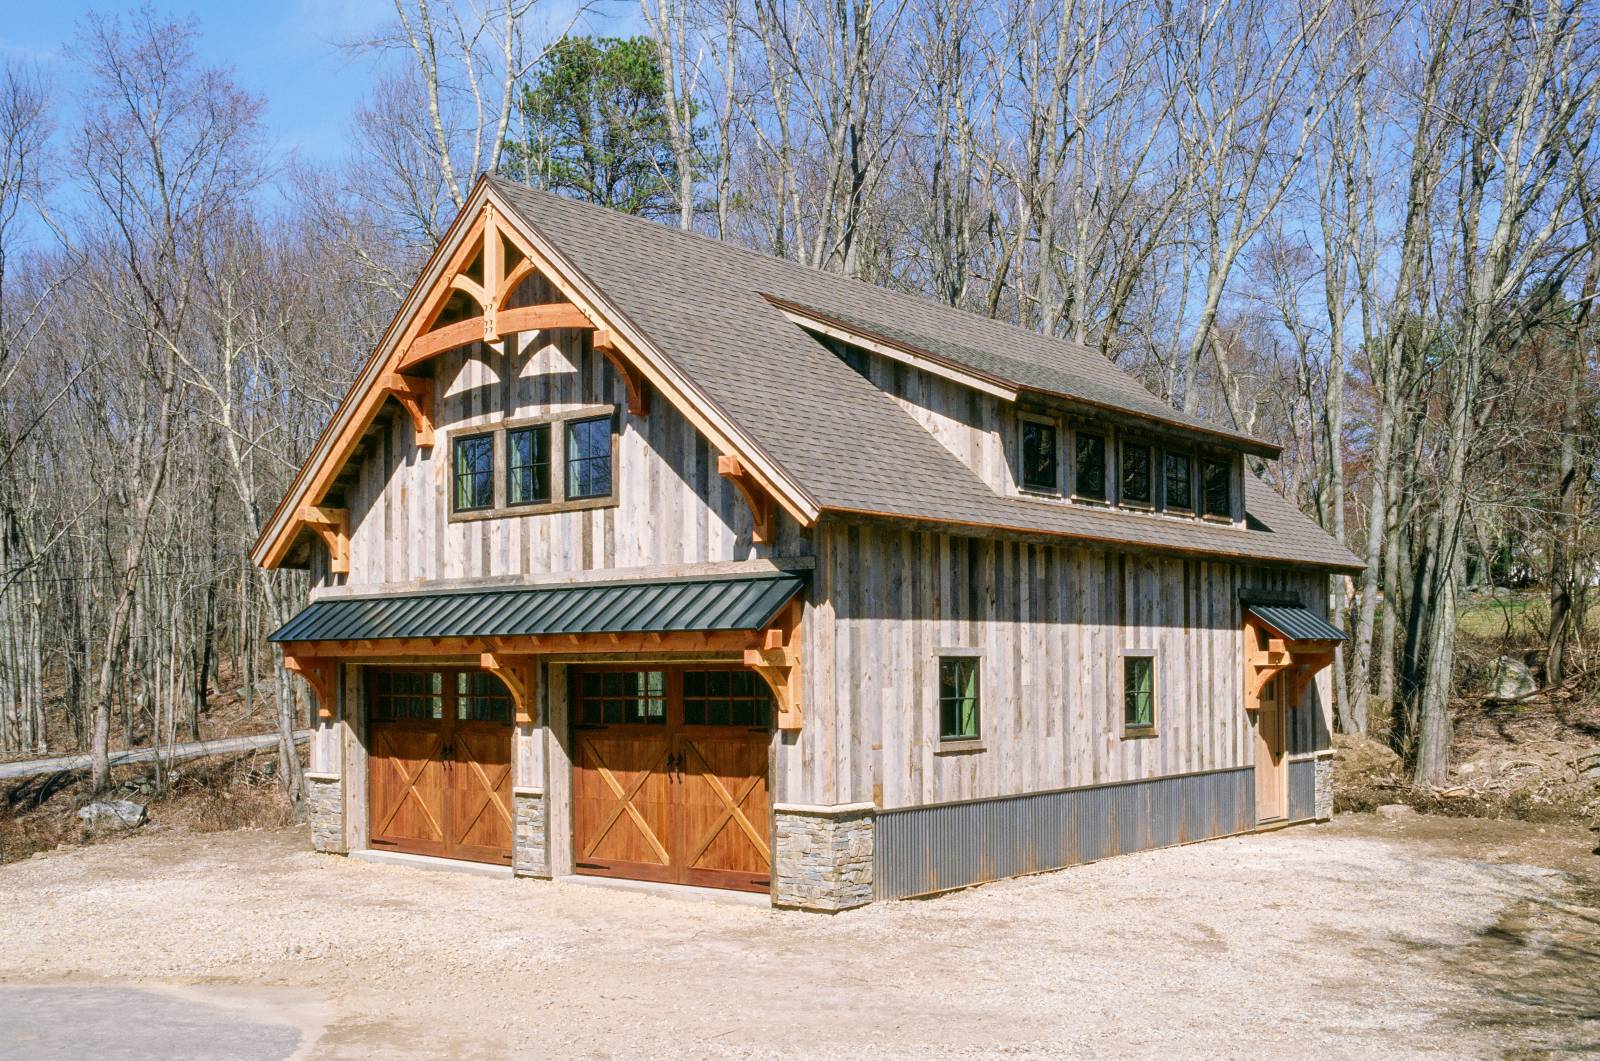 28' x 40' Carriage Barn (Tolland CT)